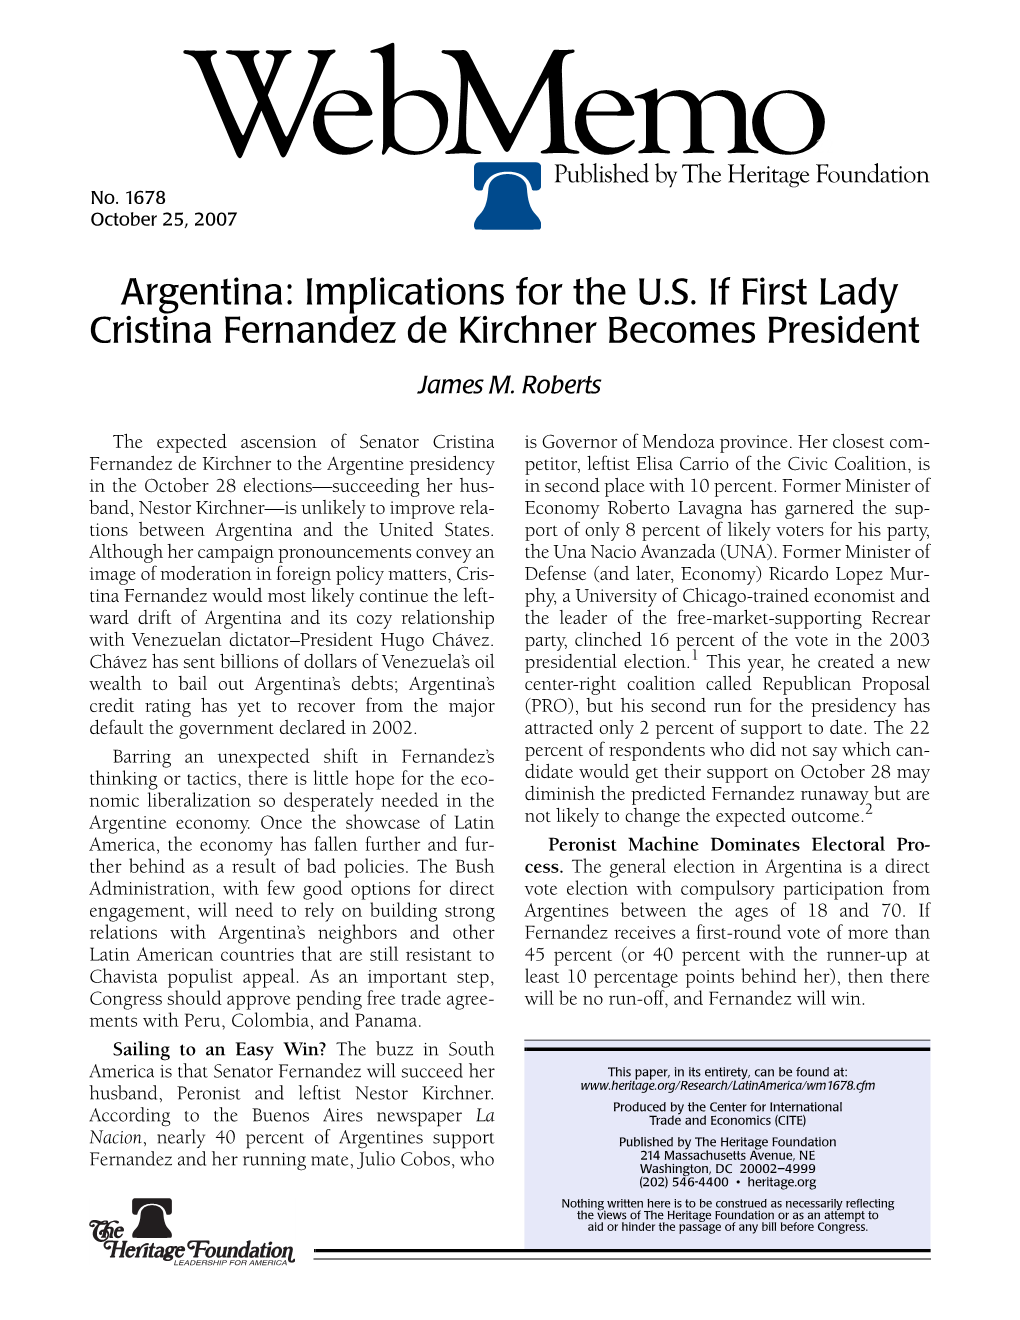 Argentina: Implications for the U.S. If First Lady Cristina Fernandez De Kirchner Becomes President James M